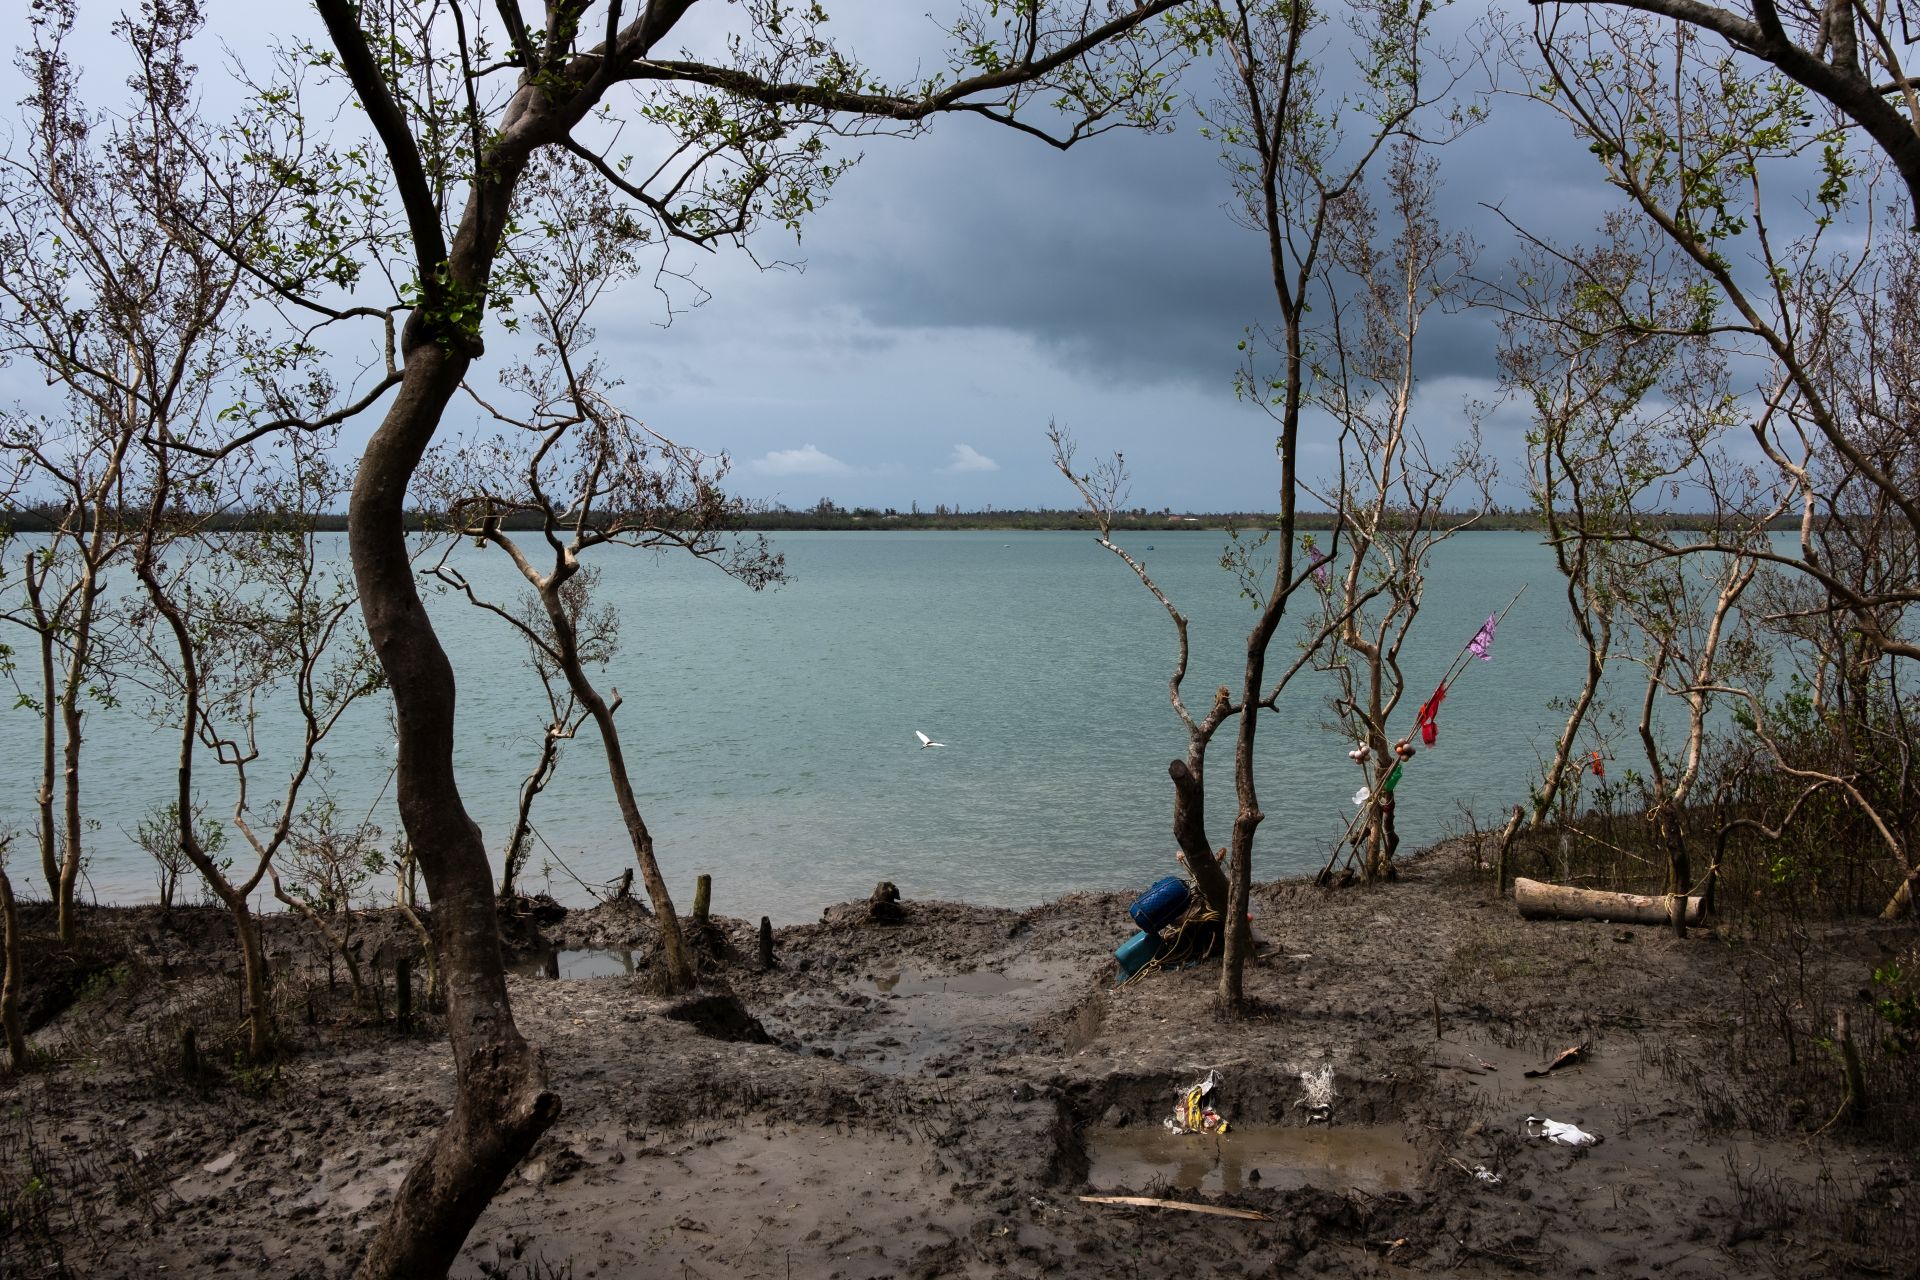 Mangroves are ecologically very beneficial for the Sundarbans as they form natural barriers against storm surges and floods. Their deforestation has aggravated the destruction caused by Amphan and has left the Sundarbans more vulnerable to such storms and cyclones. (Image: WaterAid/ Subhrajit Sen)